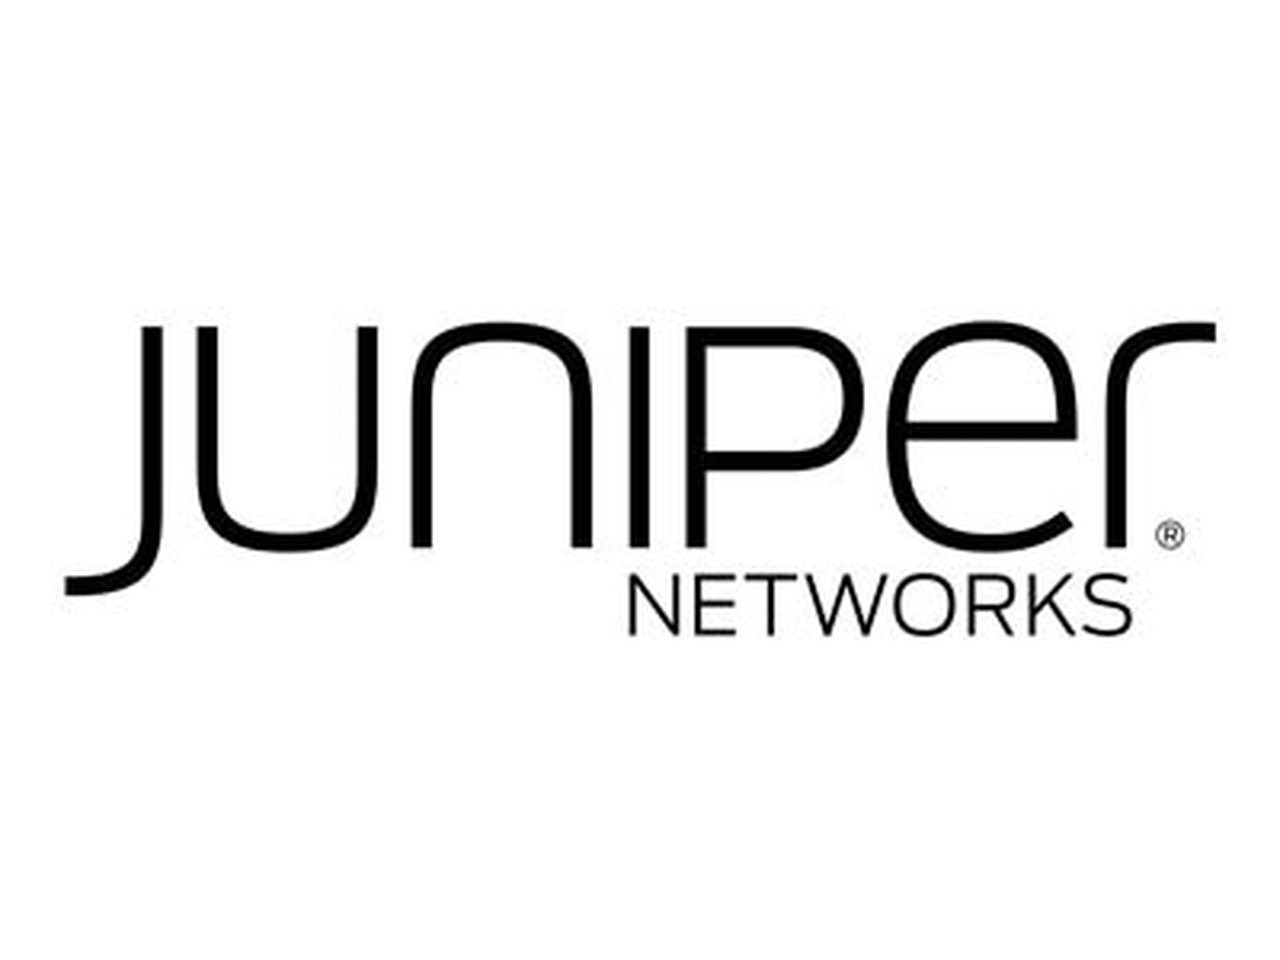 Juniper SRX345 Junos Software Enhanced with Firewall, NAT, IPSec, Routing, Switching, MPLS and Application Security Services (must order SRX345 to complete the system)